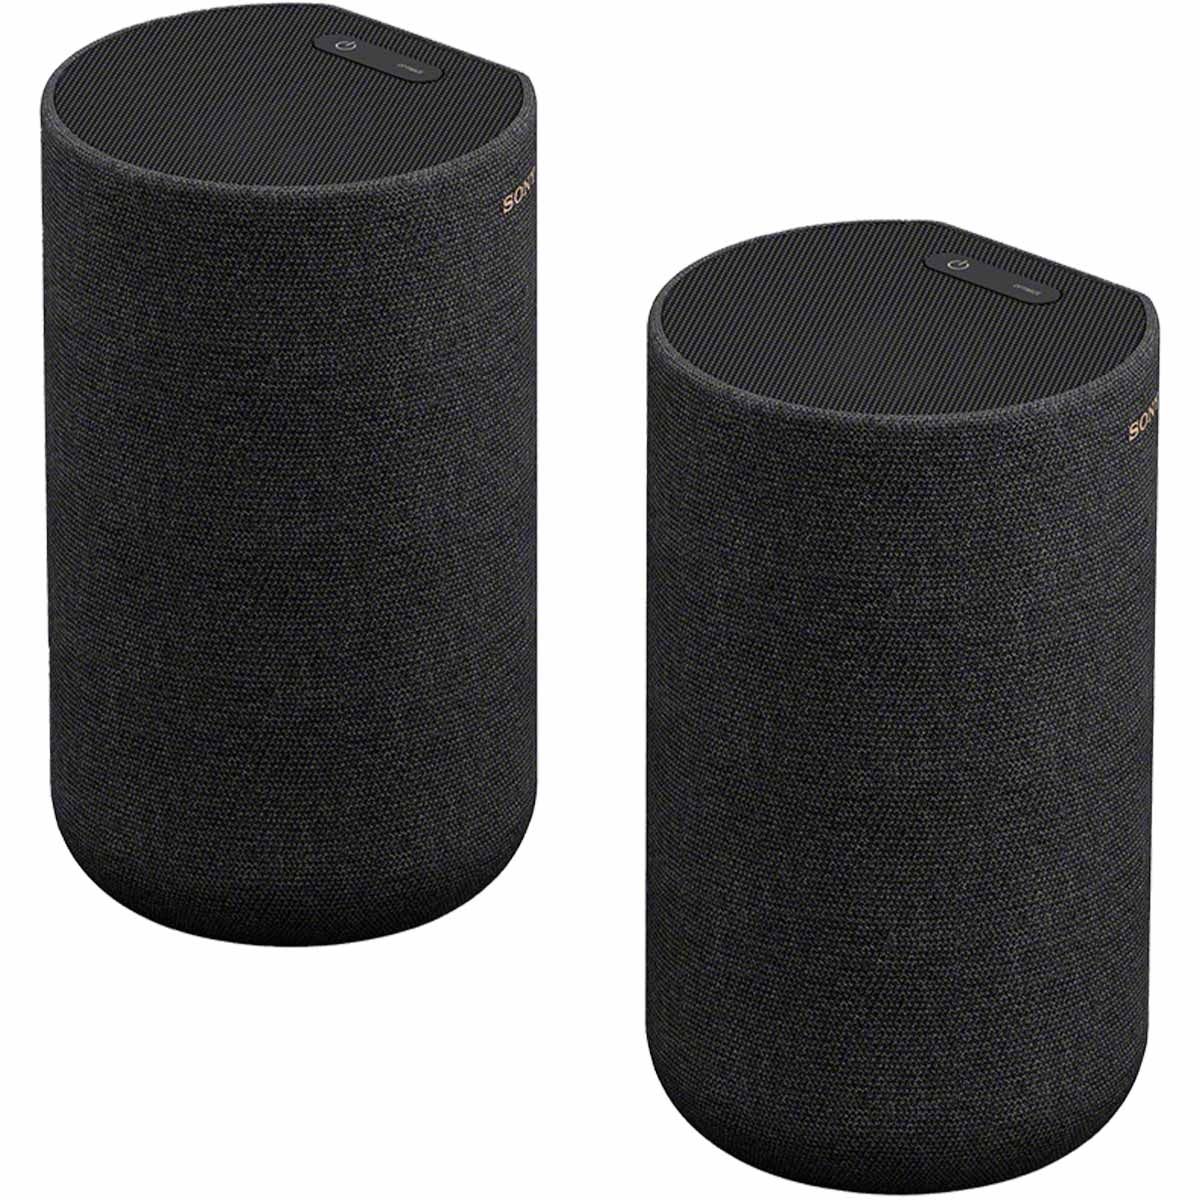 Sony SARS5 Wireless rear speakers with built-in battery for HT-A7000/HT-A5000 - angled front view of pair